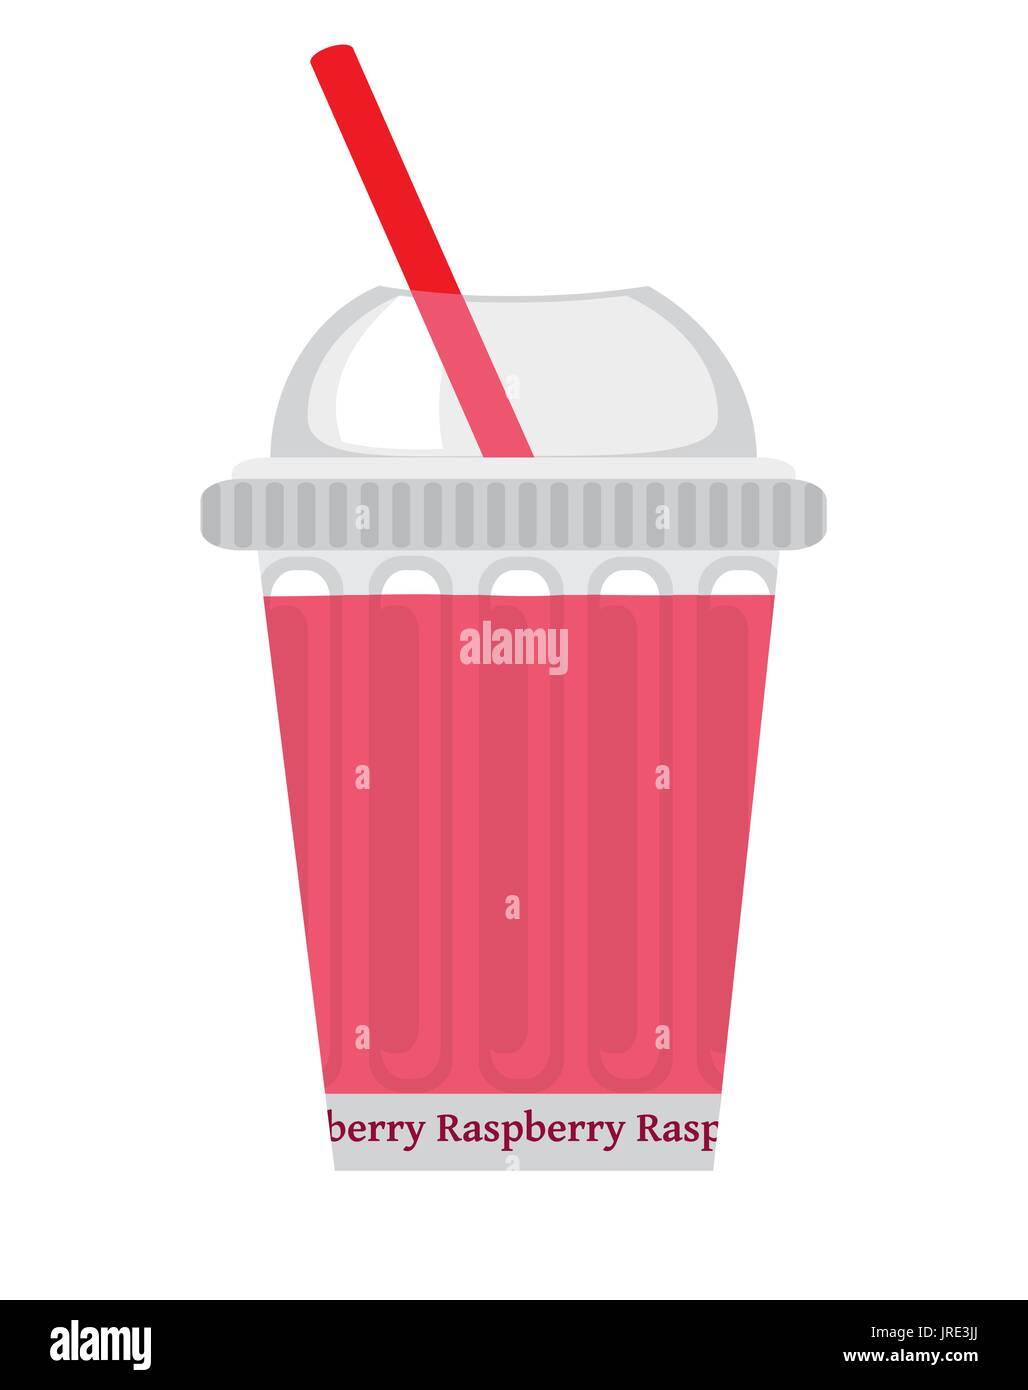 https://c8.alamy.com/comp/JRE3JJ/plastic-cup-with-smoothie-isolated-JRE3JJ.jpg